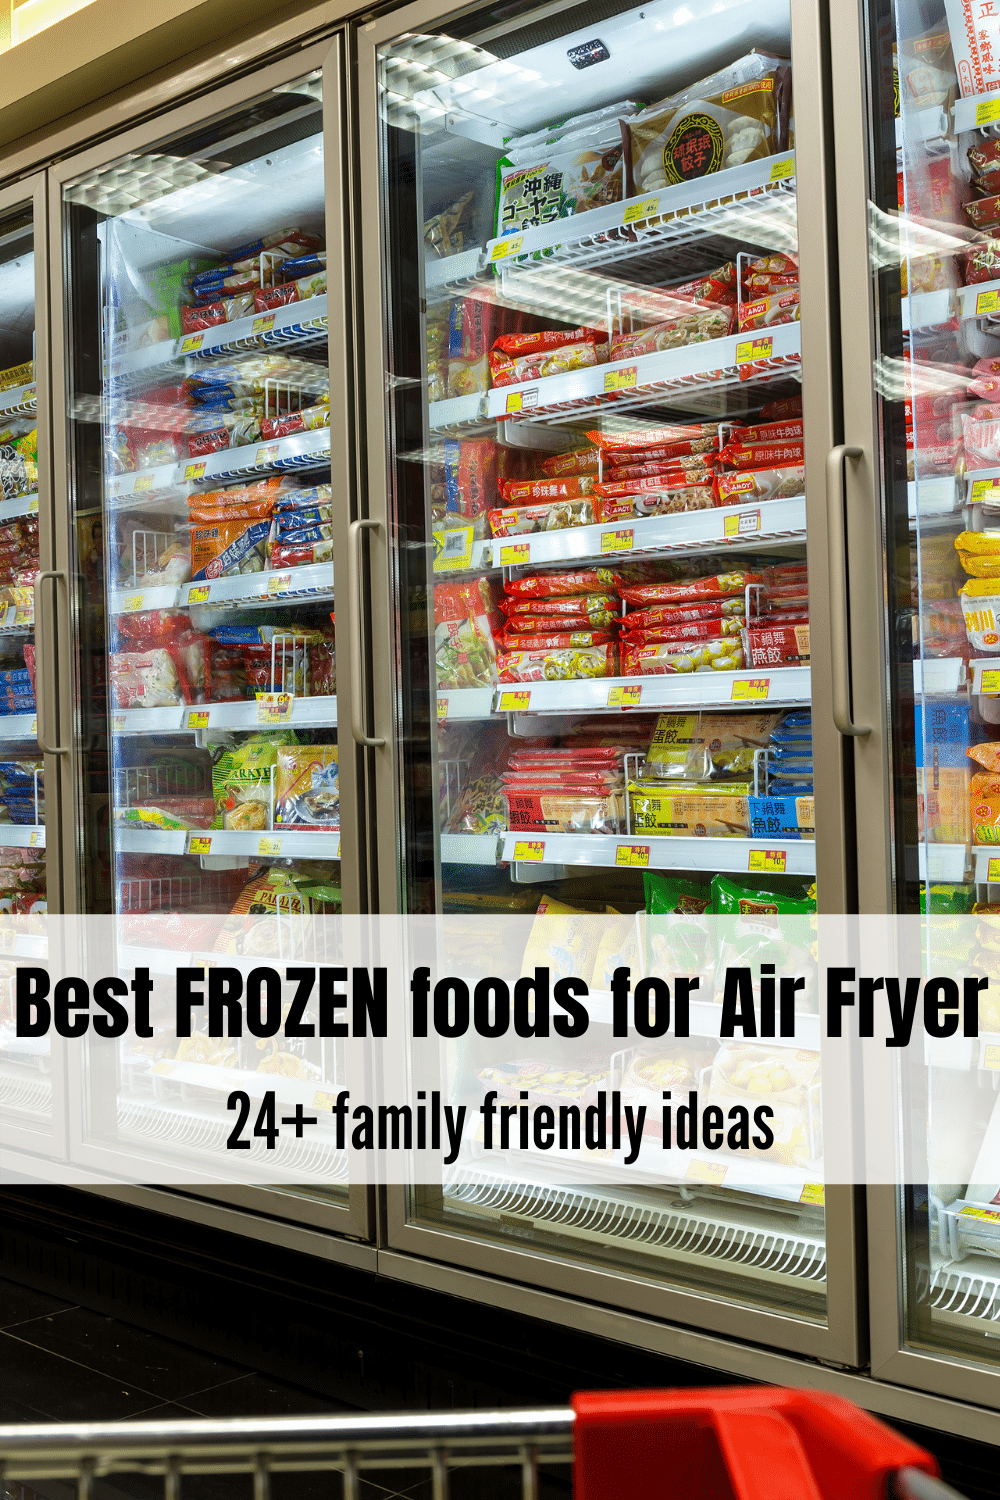 Wondering what frozen foods are perfect for the air fryer? Today we are sharing the best frozen foods for the air fryer! #airfryerrecipes #frozenfoods #airfryer via @vegetarianmamma